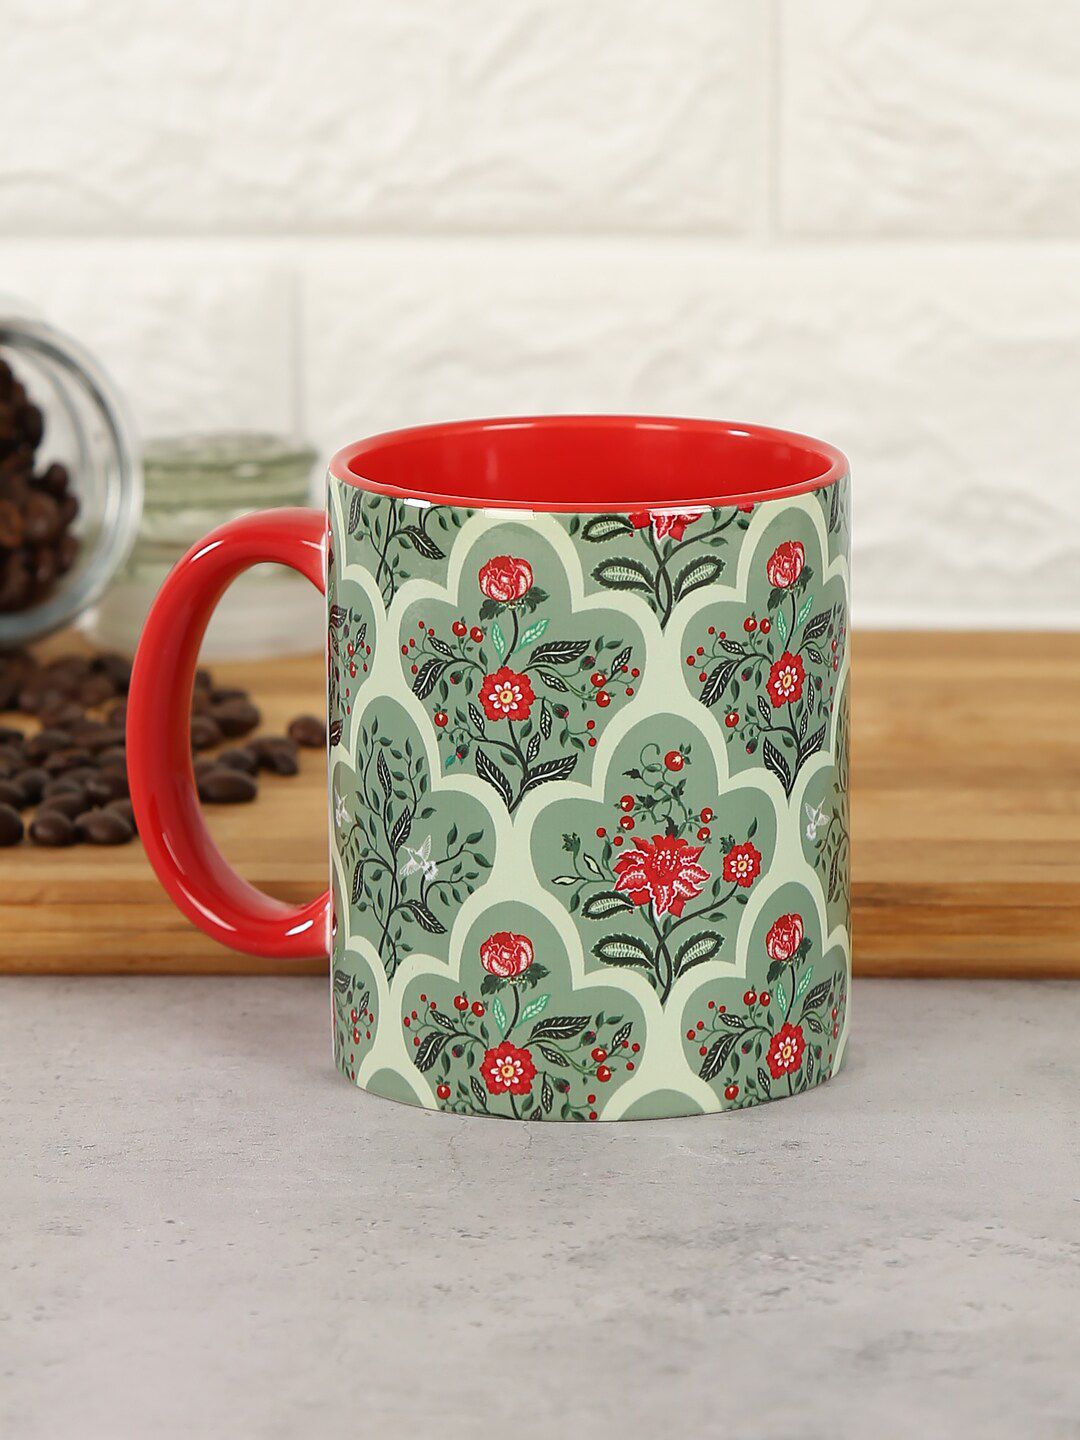 India Circus by Krsnaa Mehta Green & Red Floral Printed Mug Price in India